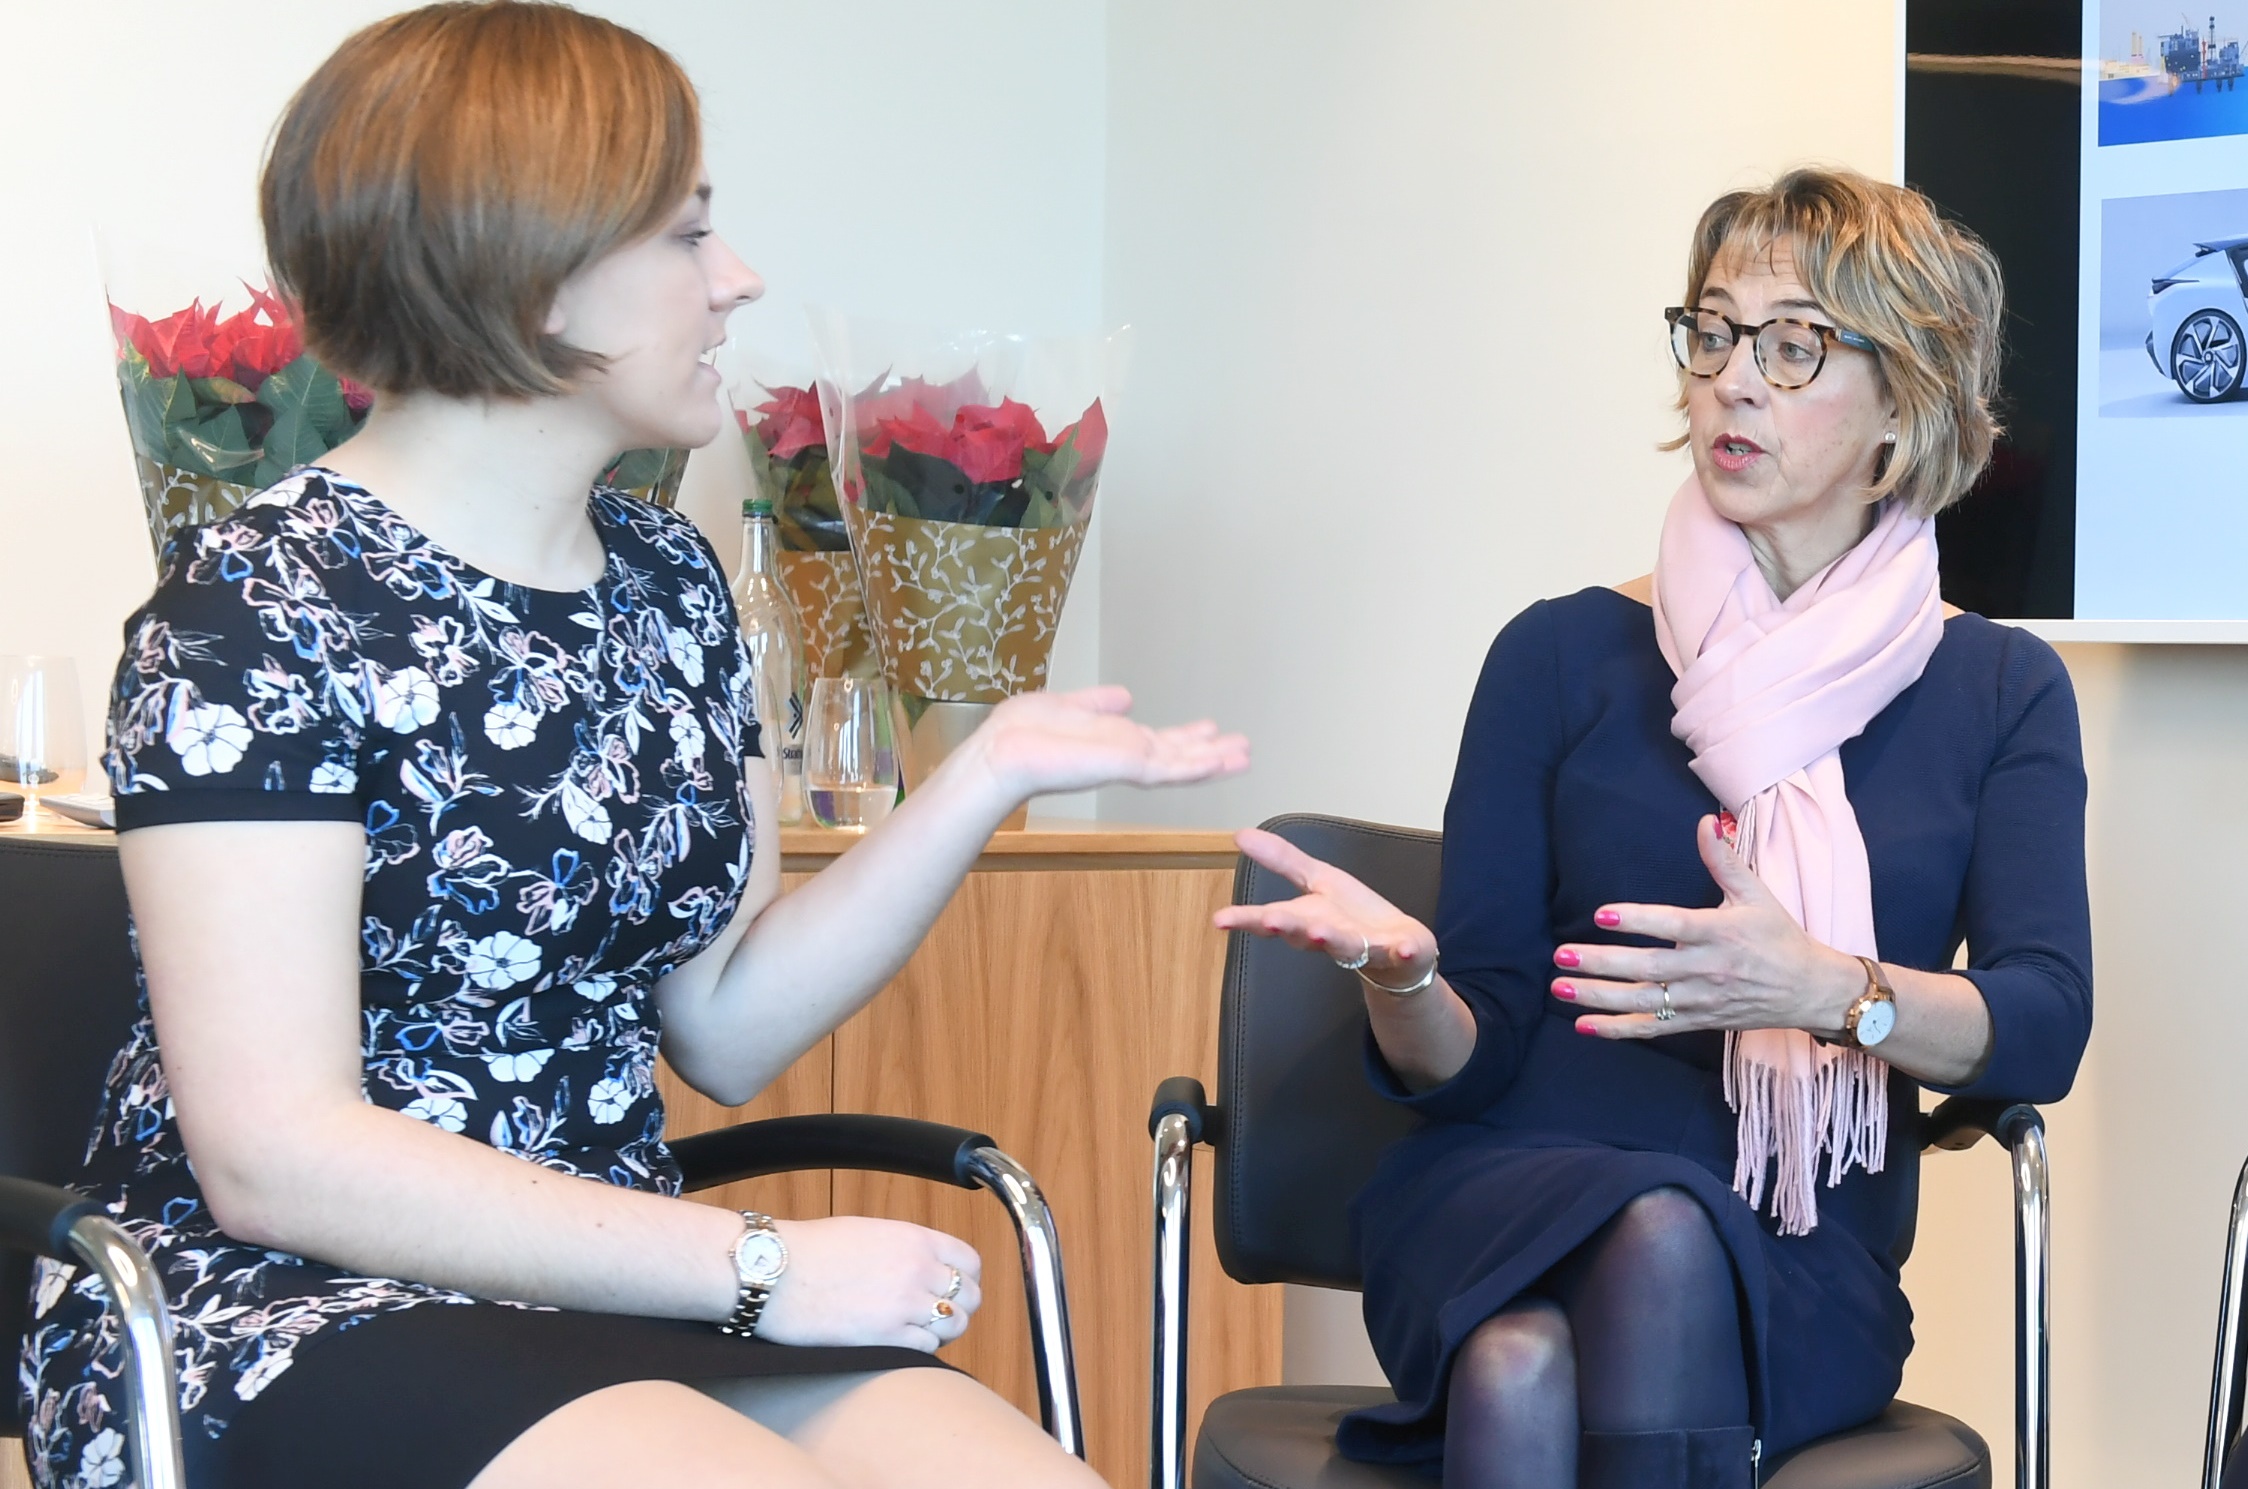 Left, Carla Carla Taylor – Software Engineer and former apprentice at Royal Bank of Scotland and Prof Elizabeth Gammie (Right) – Head of Business School at Robert Gordon University.